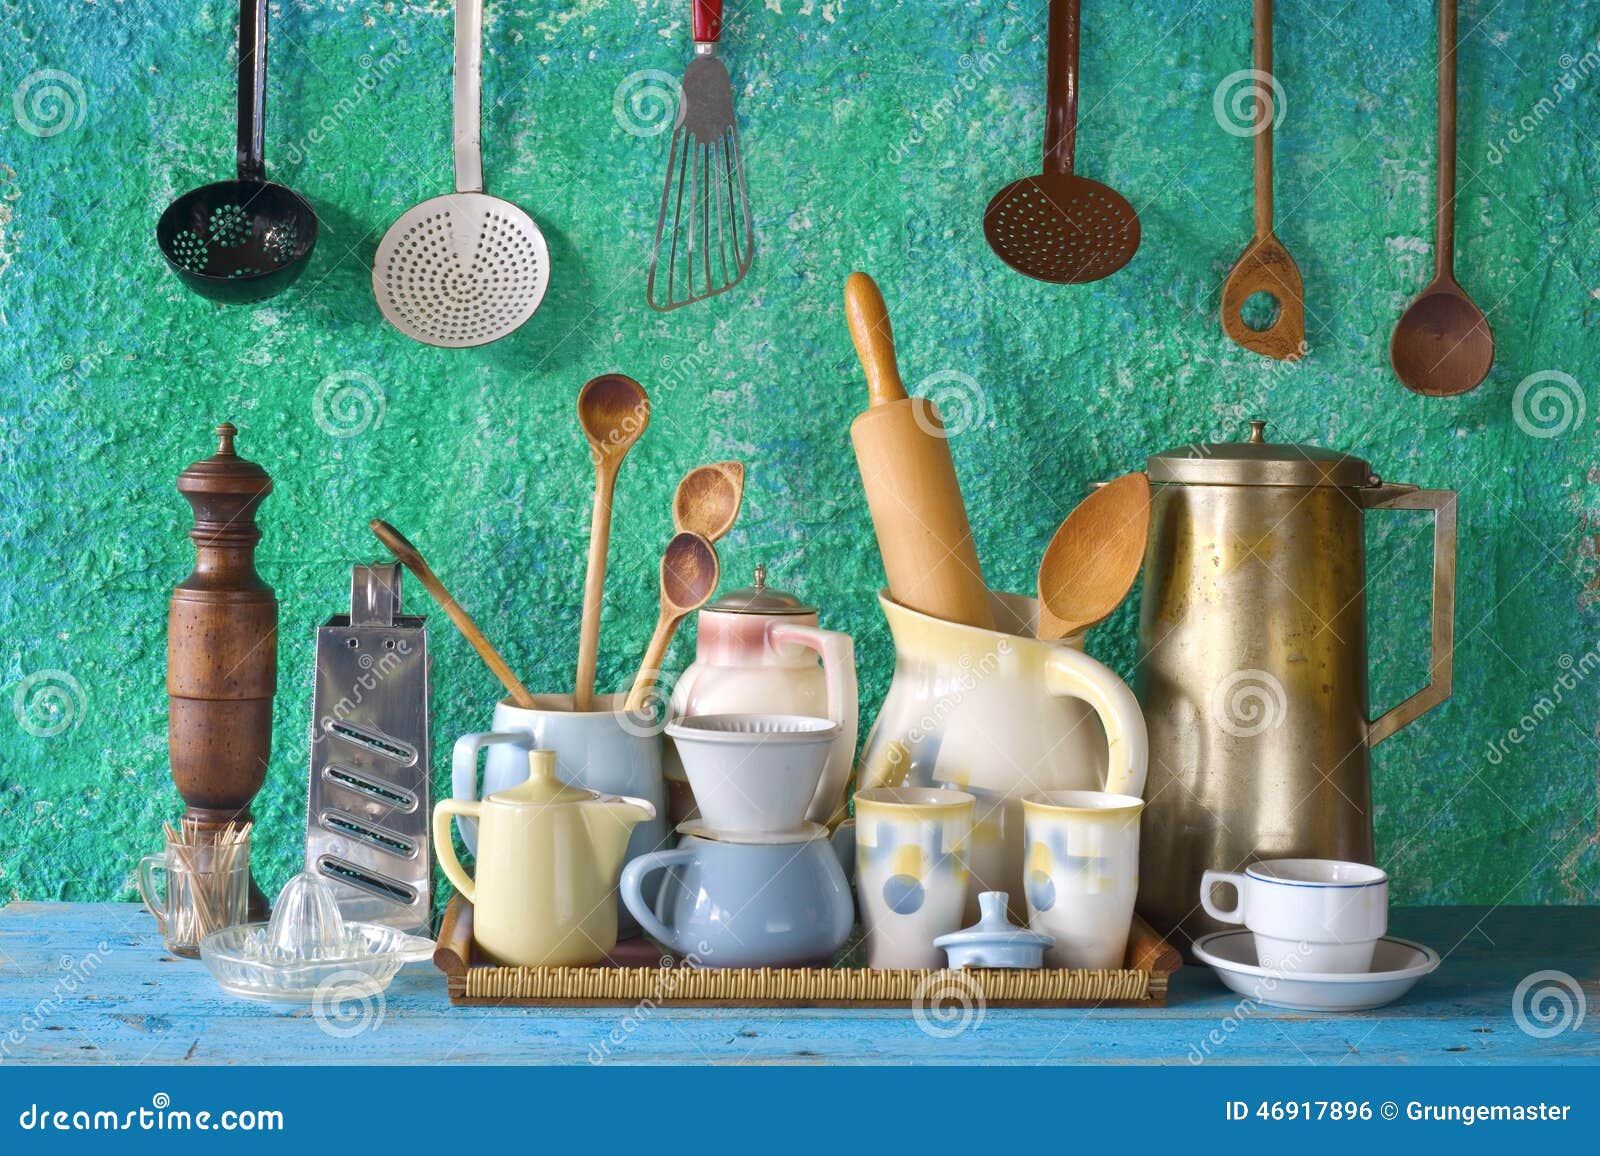 Collection of Vintage Kitchenware Stock Photo   Image of household ...